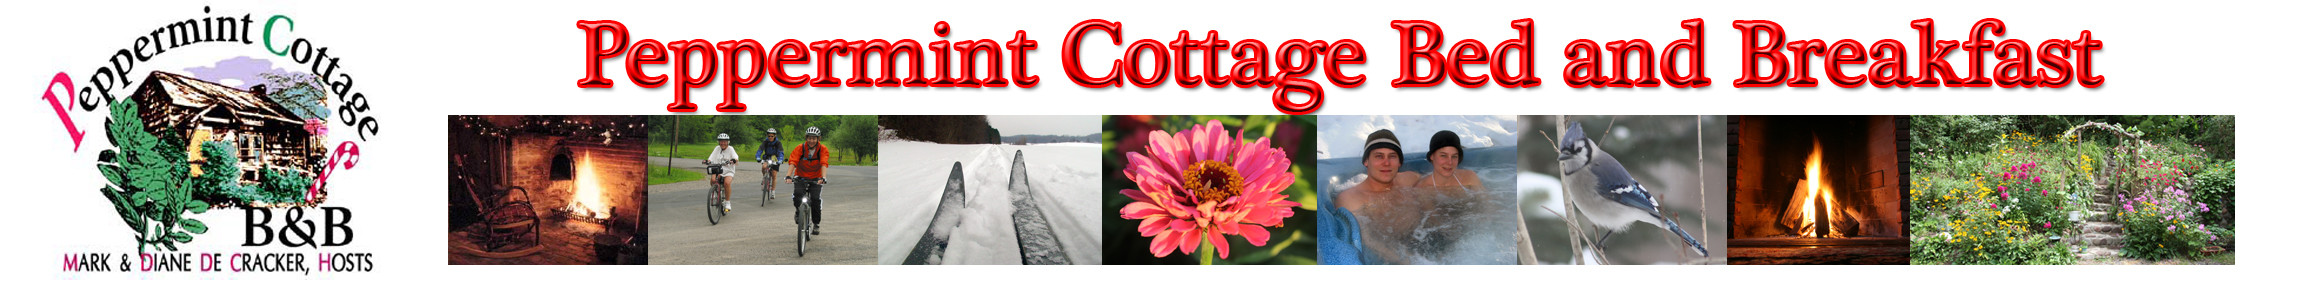 Peppermint Cottage Bed & Breakfast